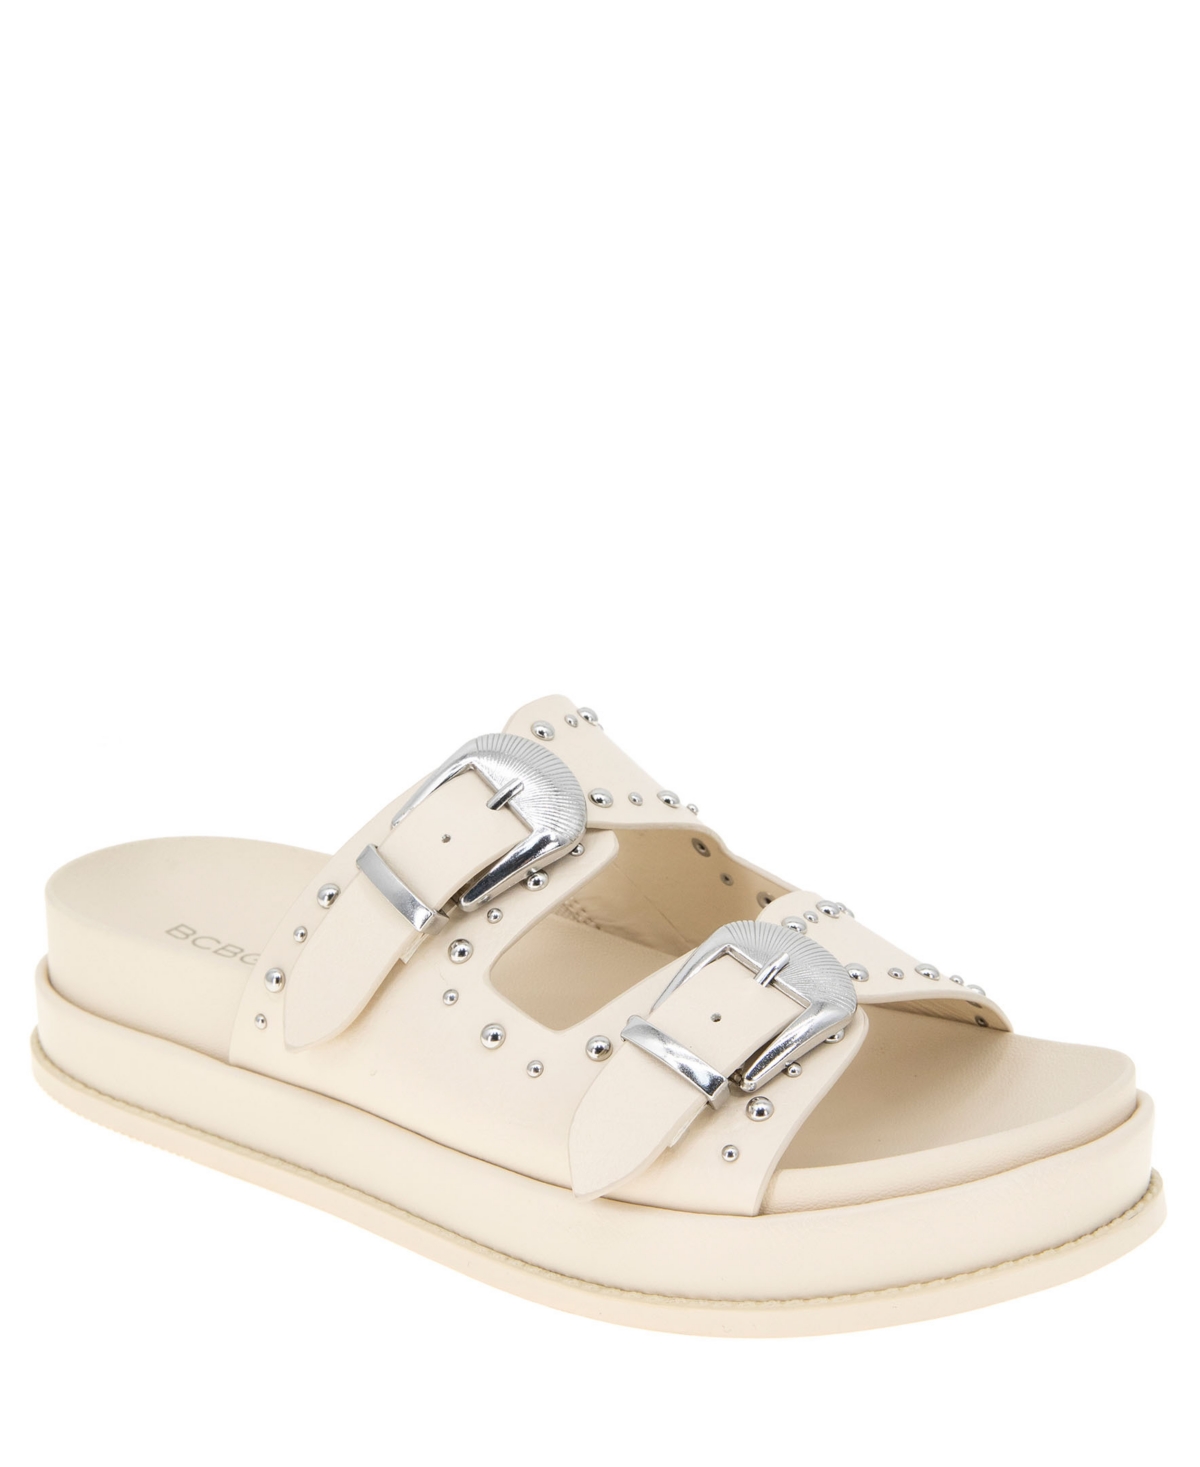 Women's Barah Chunky Footbed Double Buckle Slip-On Sandals - Bianca